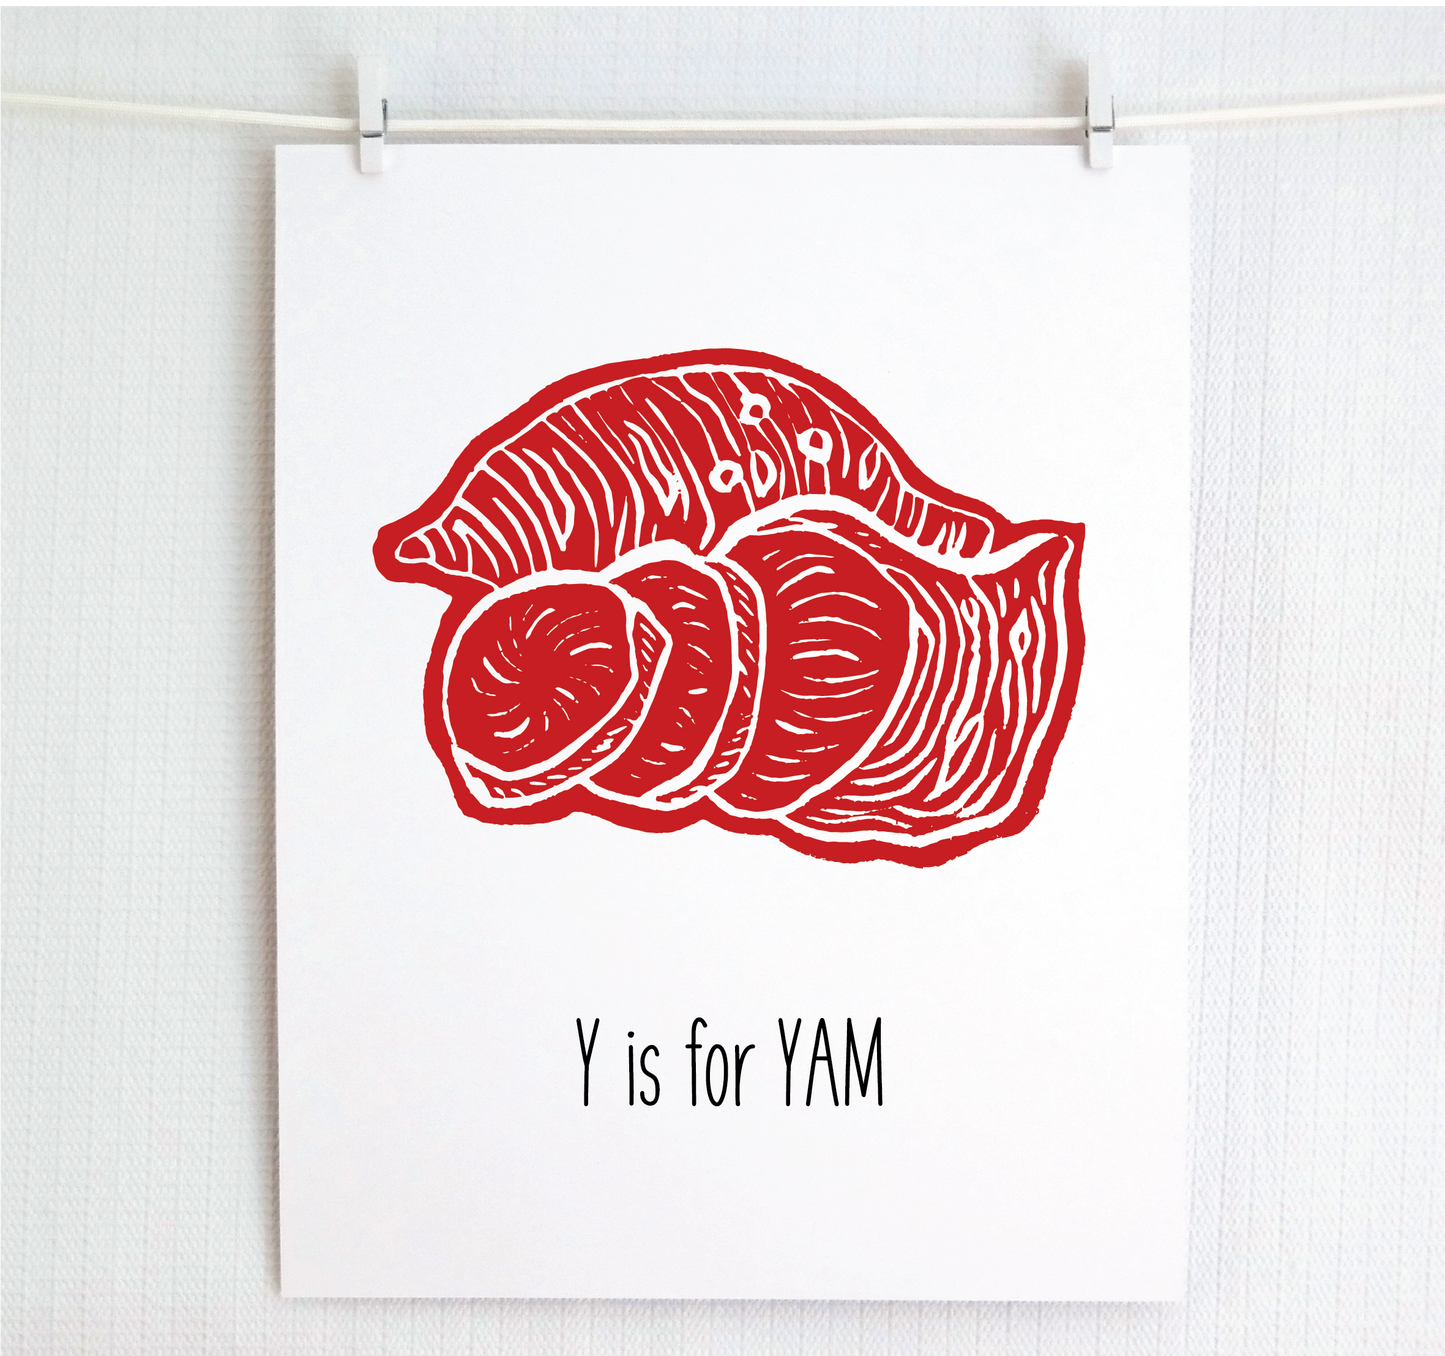 Y is for Yam